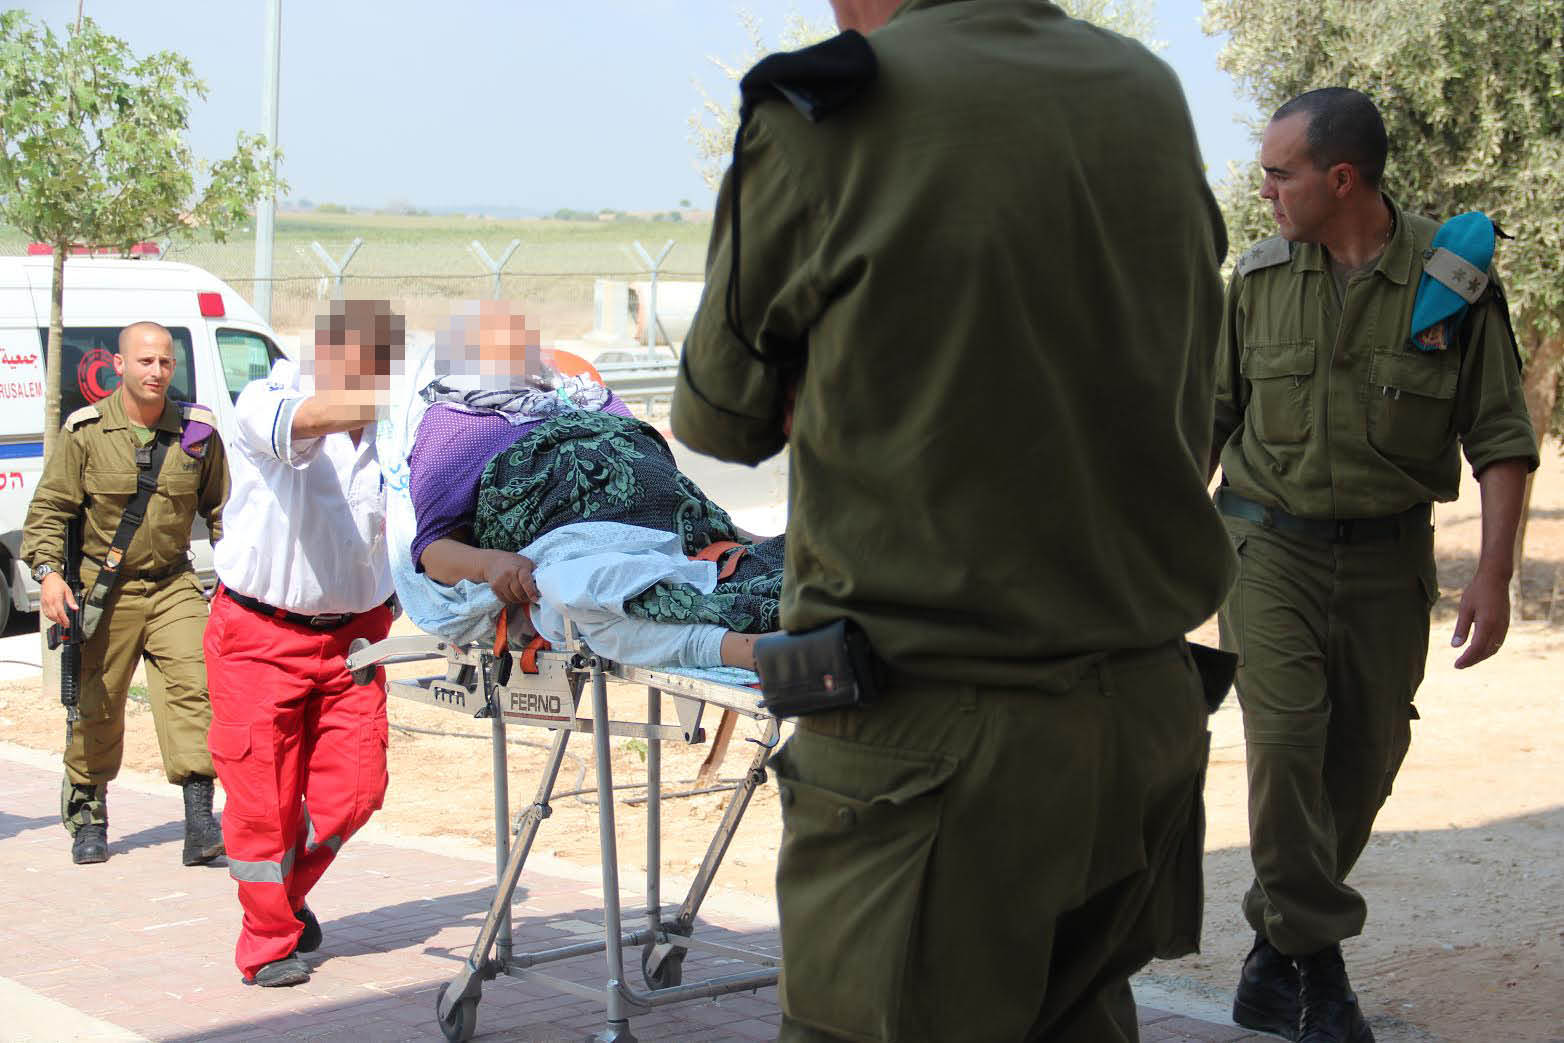  Israel and the Gaza Strip: Why Economic Sanctions Are Not Collective Punishment The IDF Medical Corps treating injured Palestinian civilians at the Erez Border Crossing. (IDF Flicker)